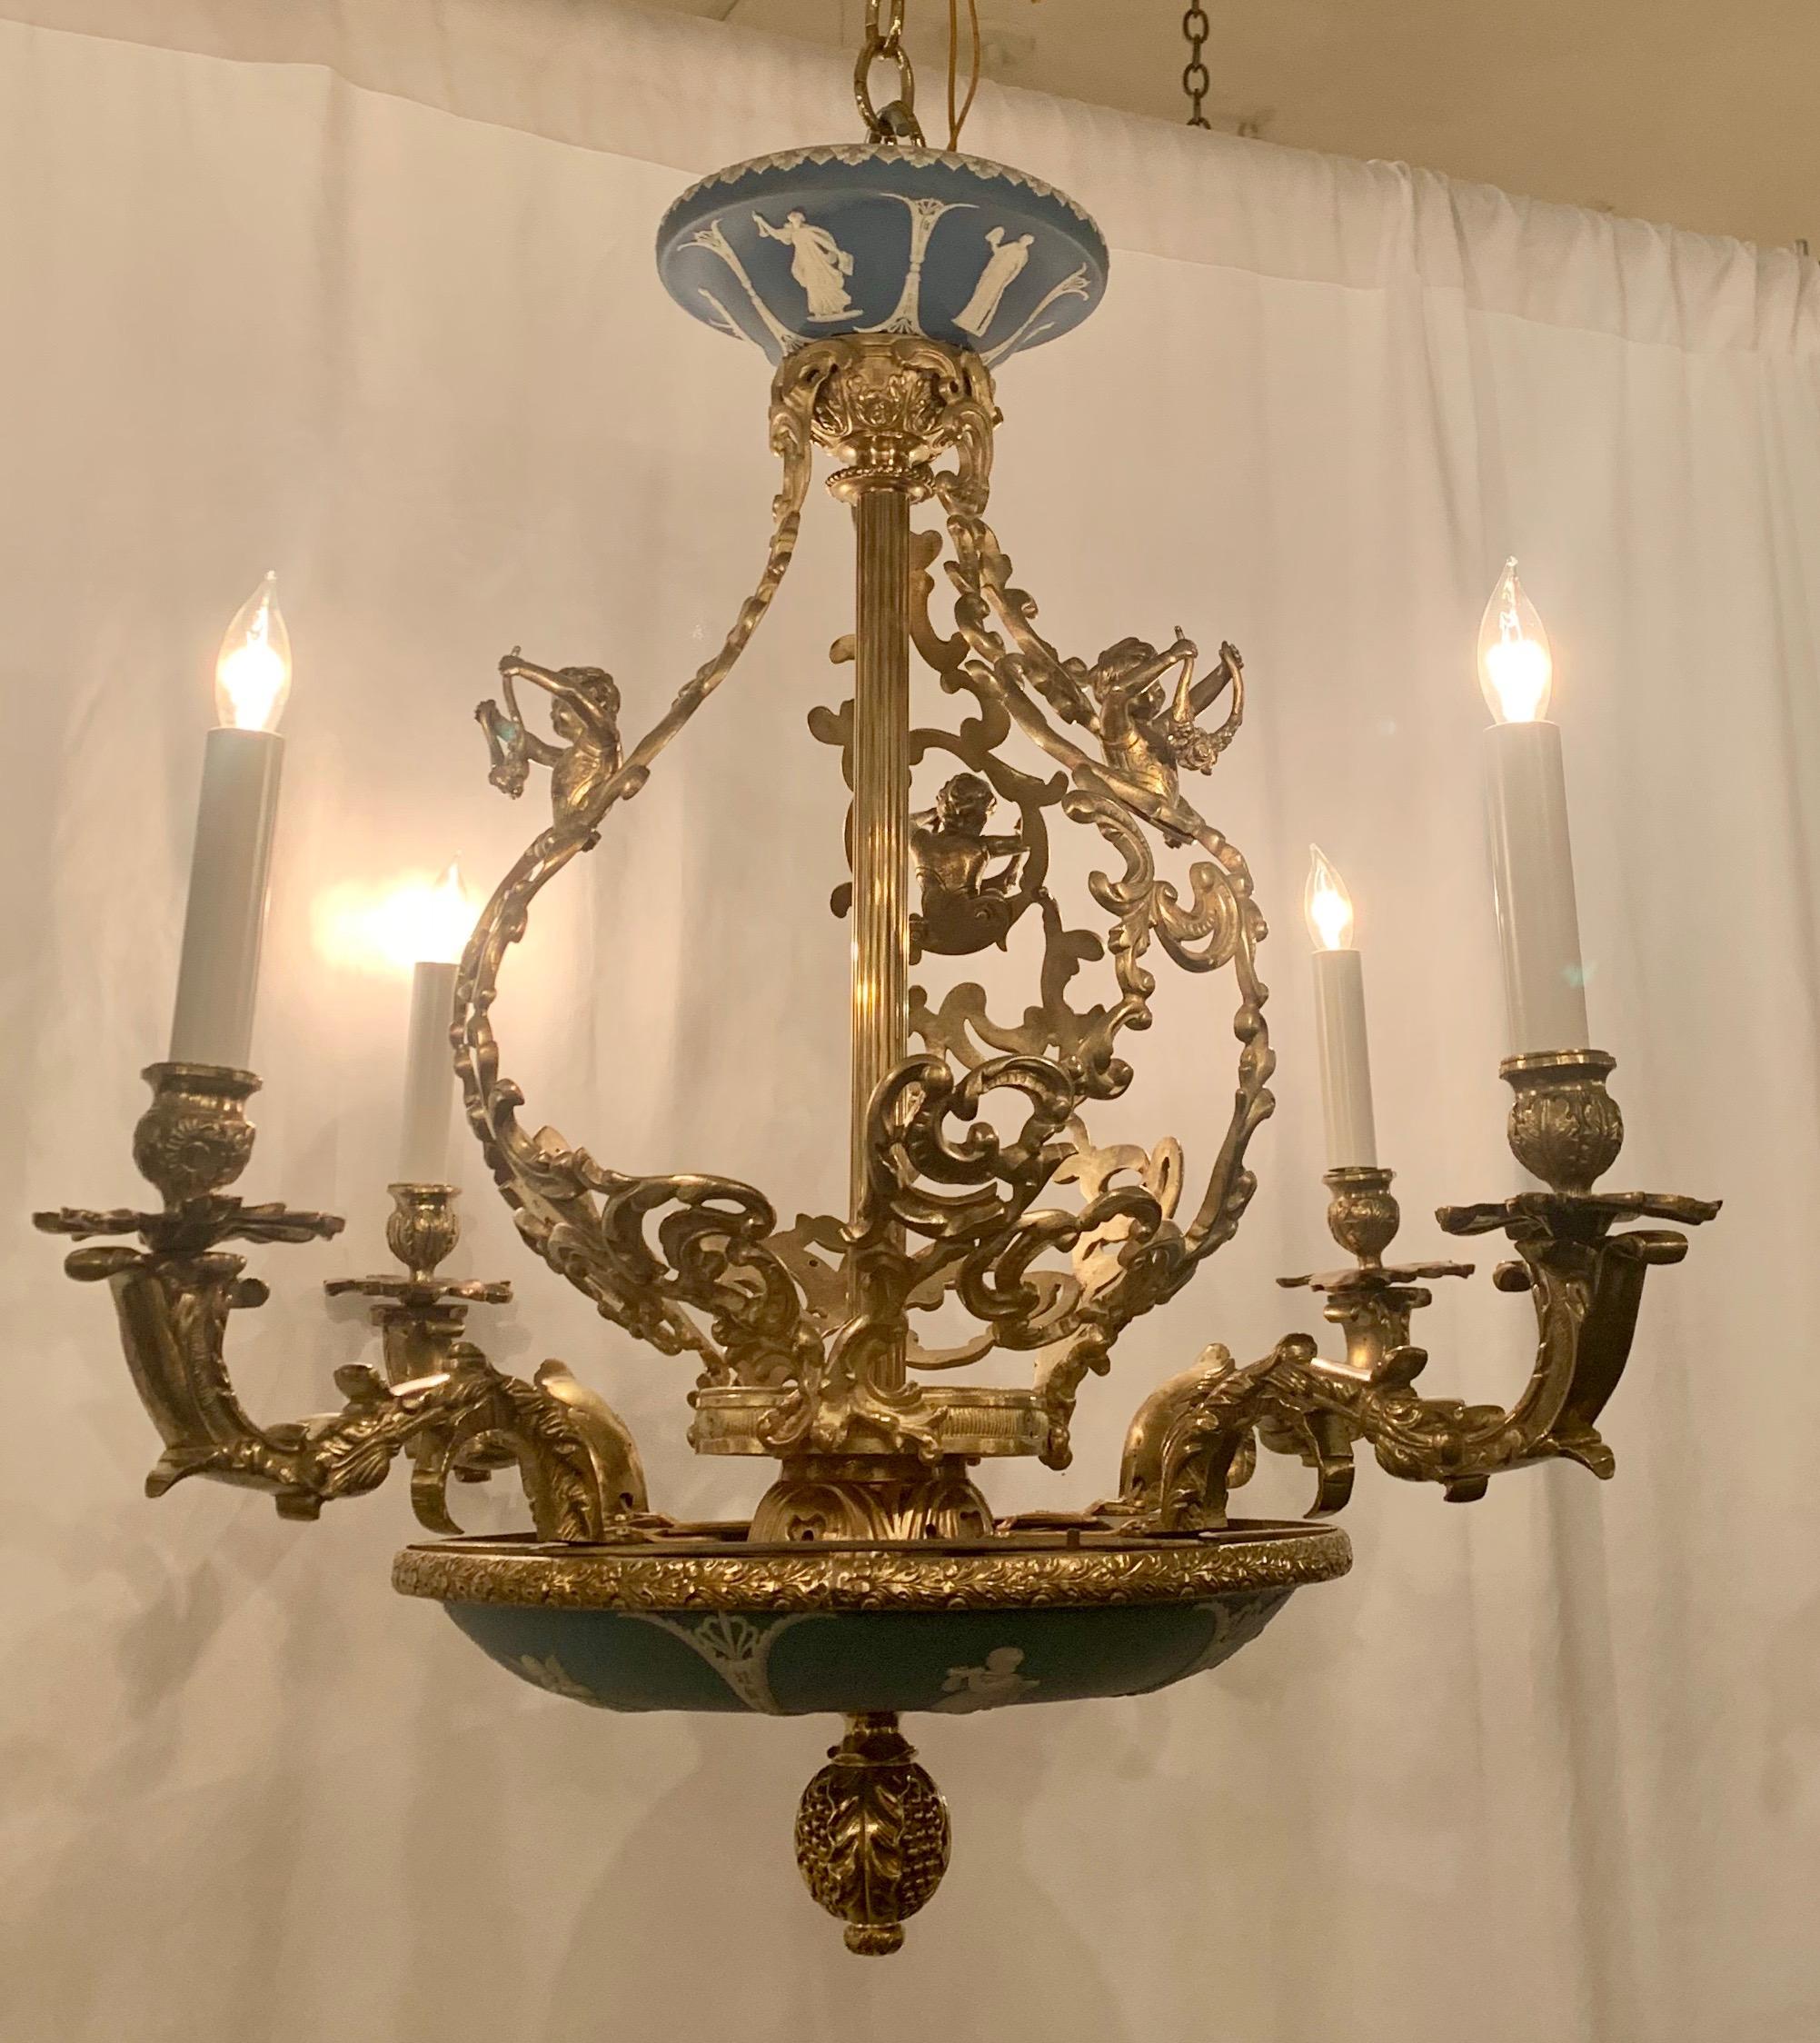 Antique English wedgwood and gold bronze Chandelier, Circa 1880's.

     